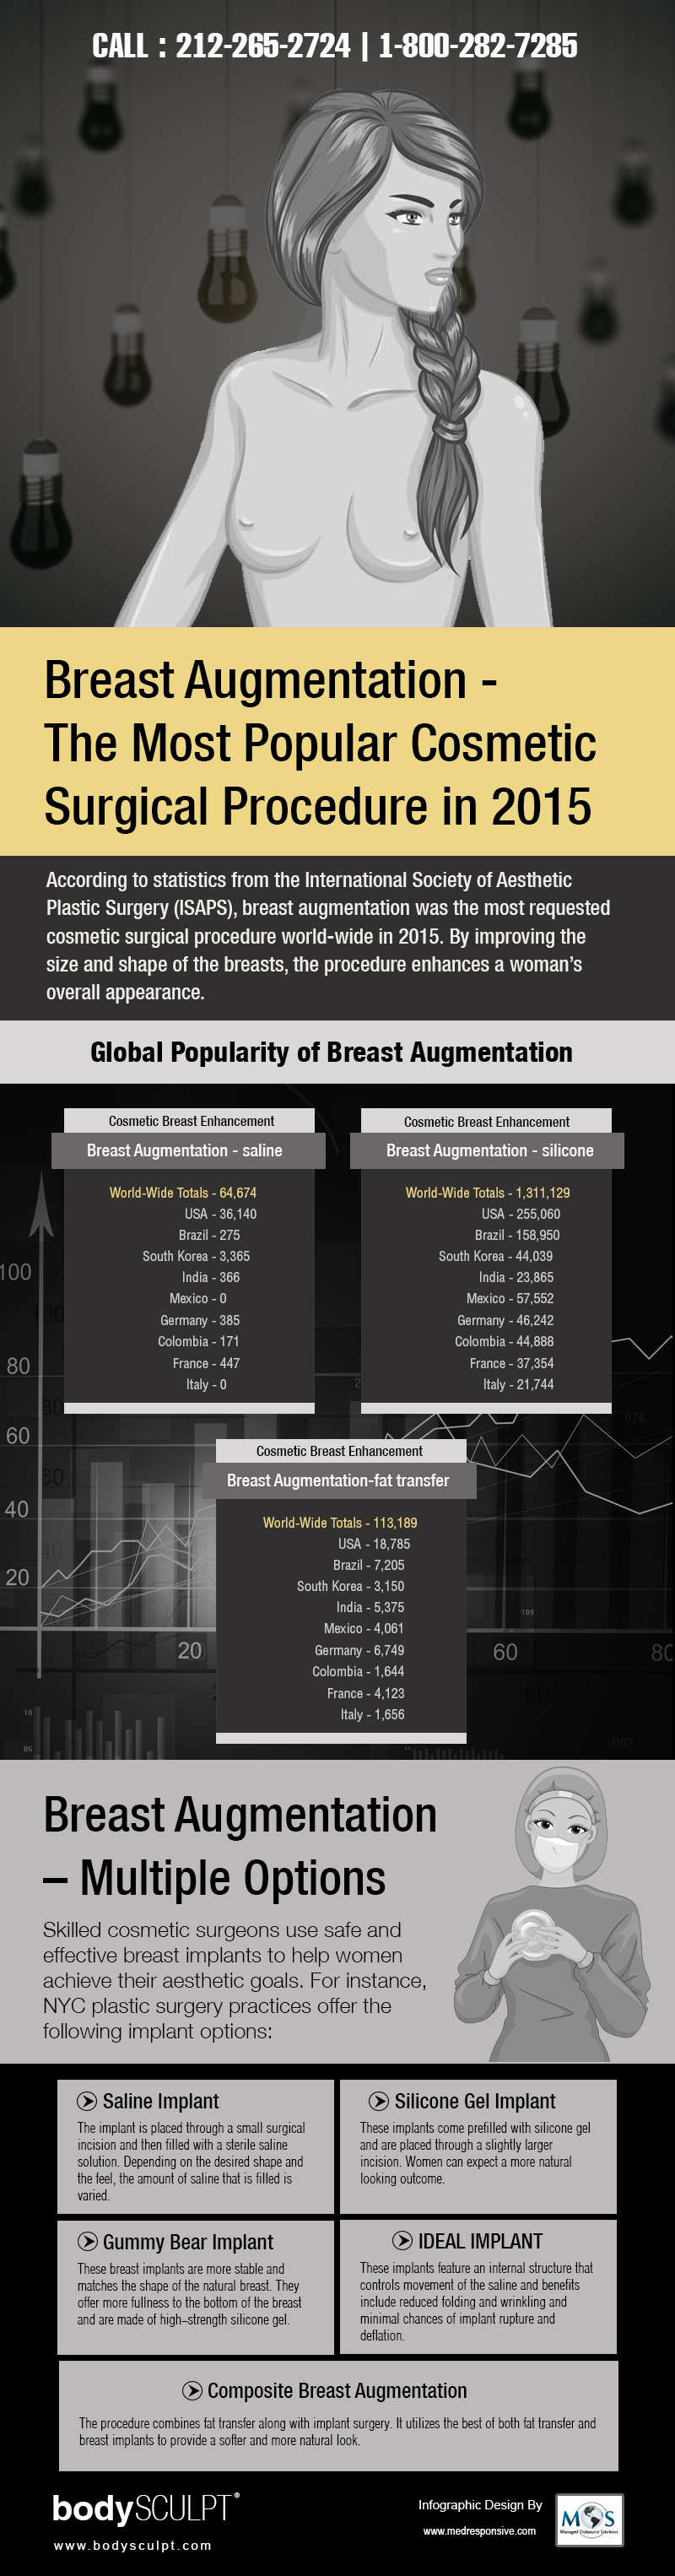 Breast Augmentation The Most Popular Cosmetic Surgical Procedure In 2015